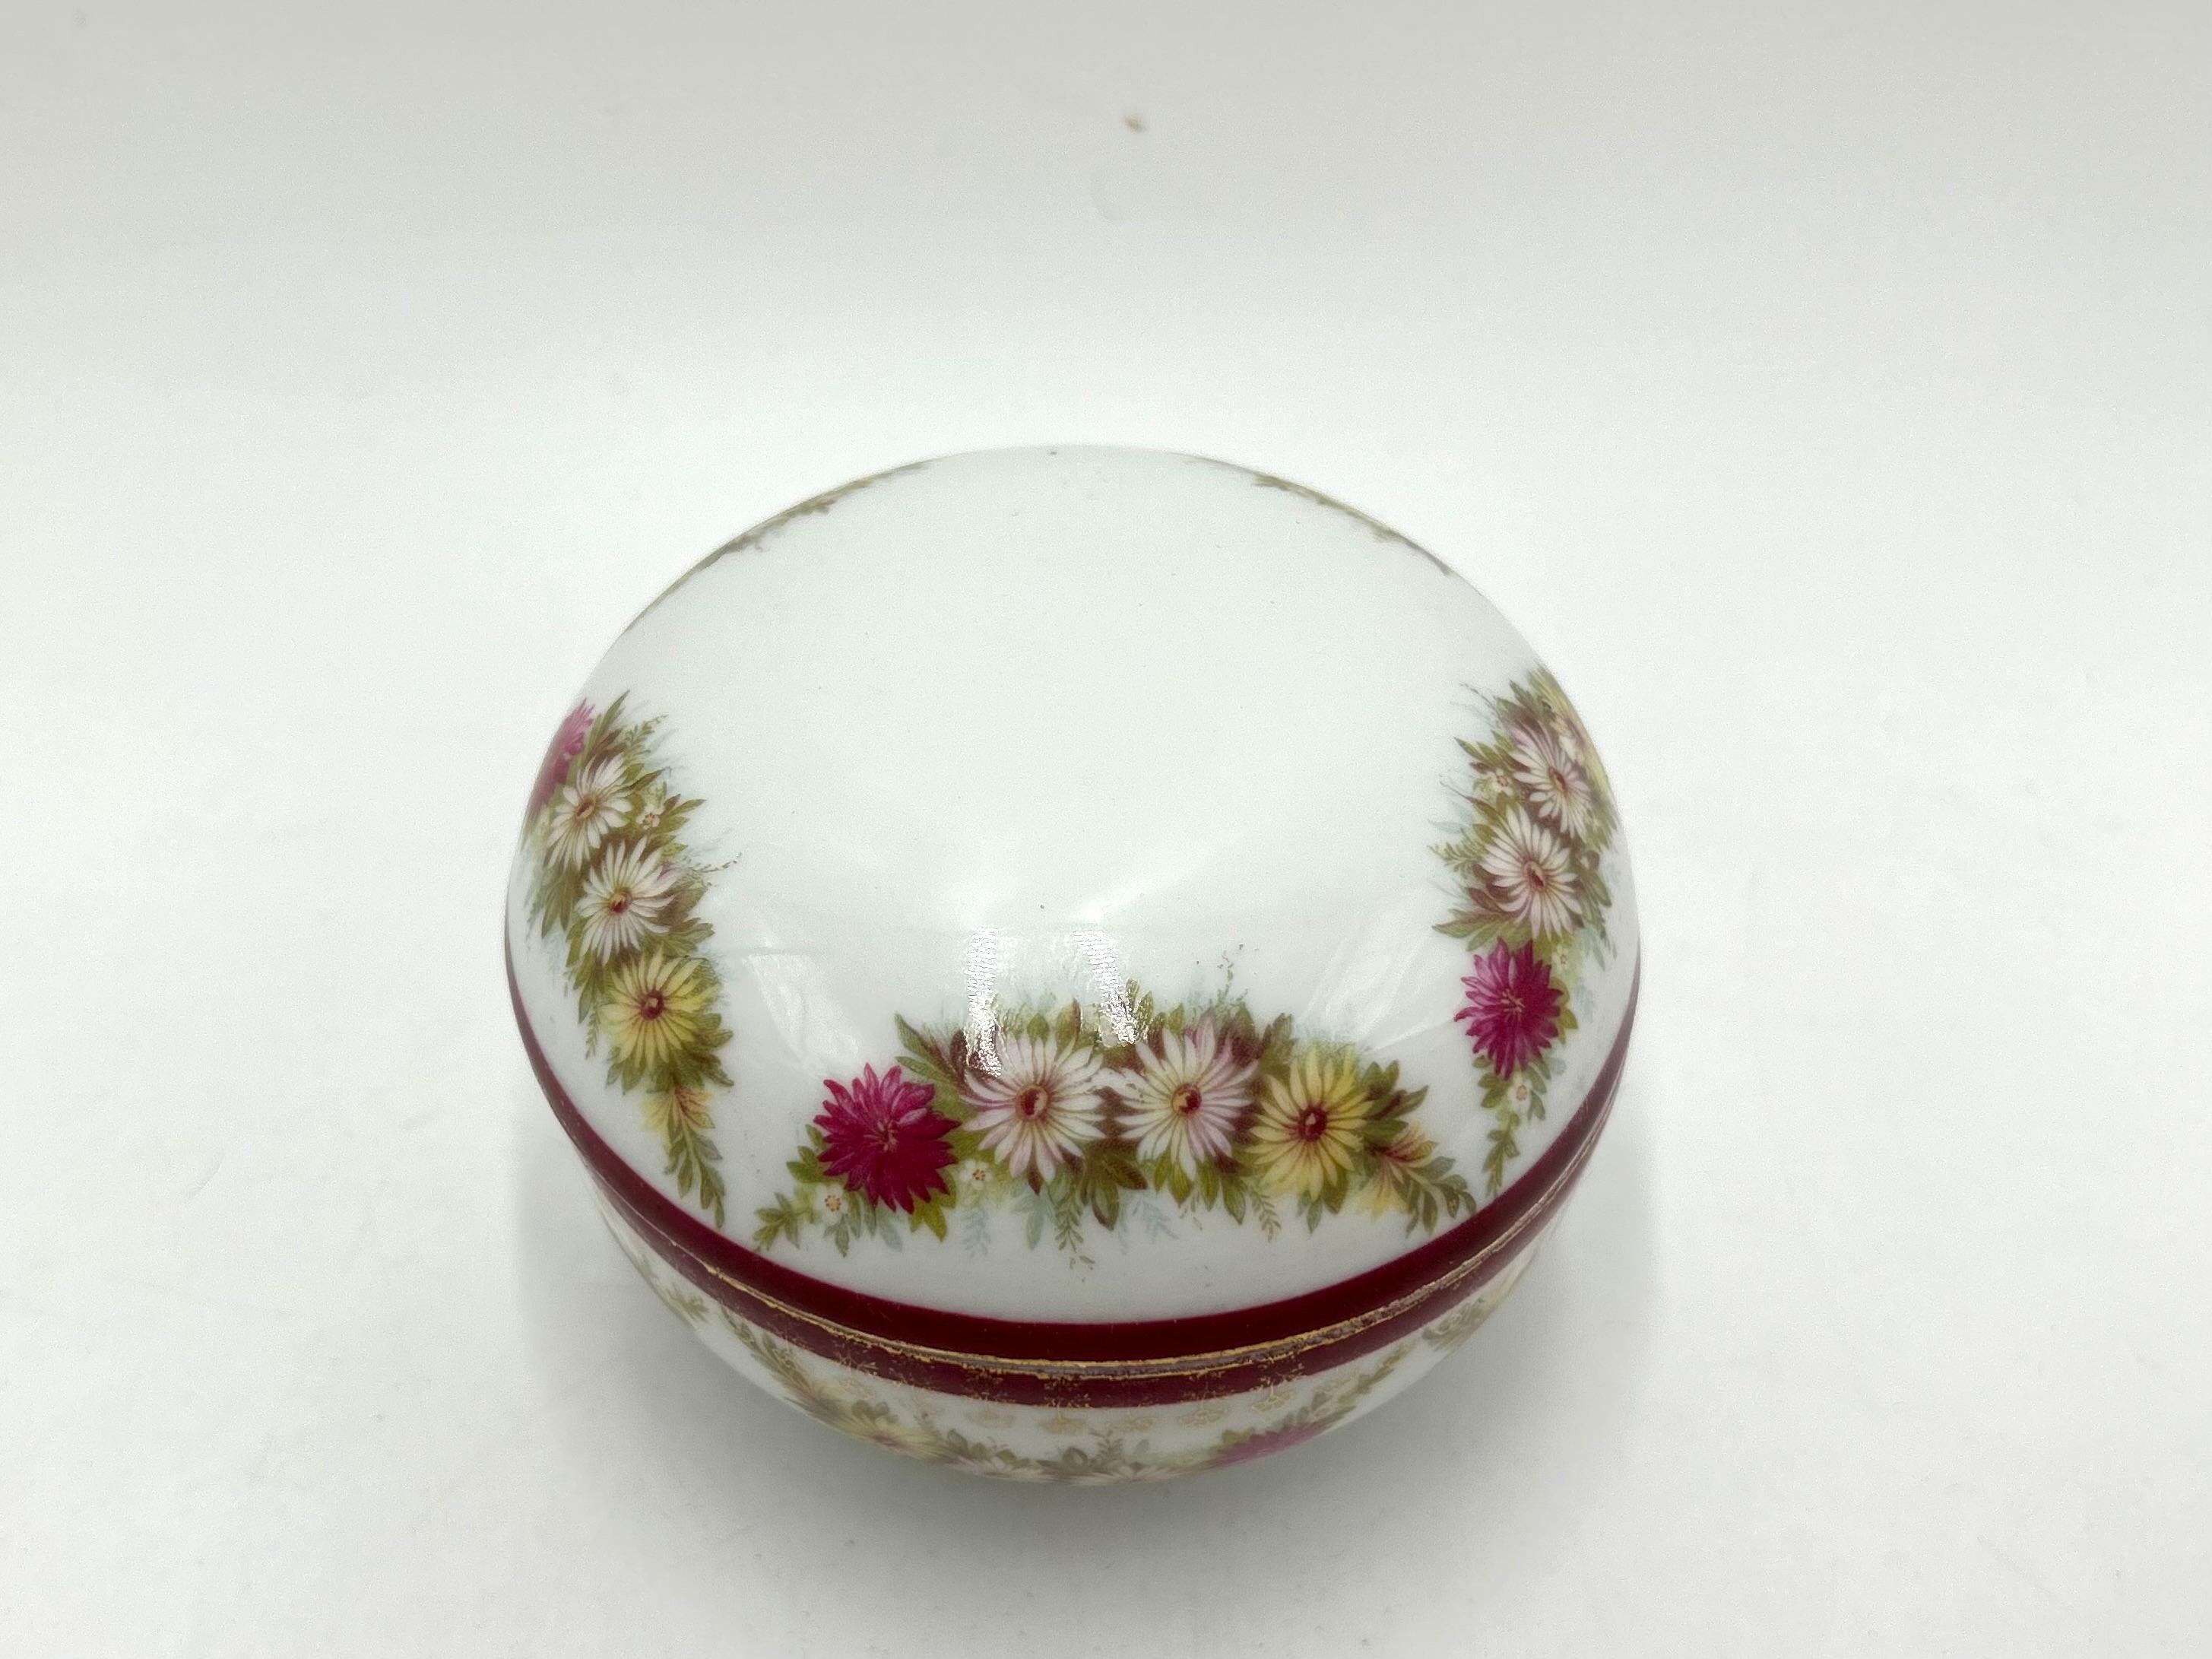 Porcelain casket made of white porcelain, decorated with a floral motif.
The gilding is slightly worn, very good condition, no cracks or chips.
Casket signed with a mark from 1910.
Measures: Height 6.5 cm
Diameter 10cm.